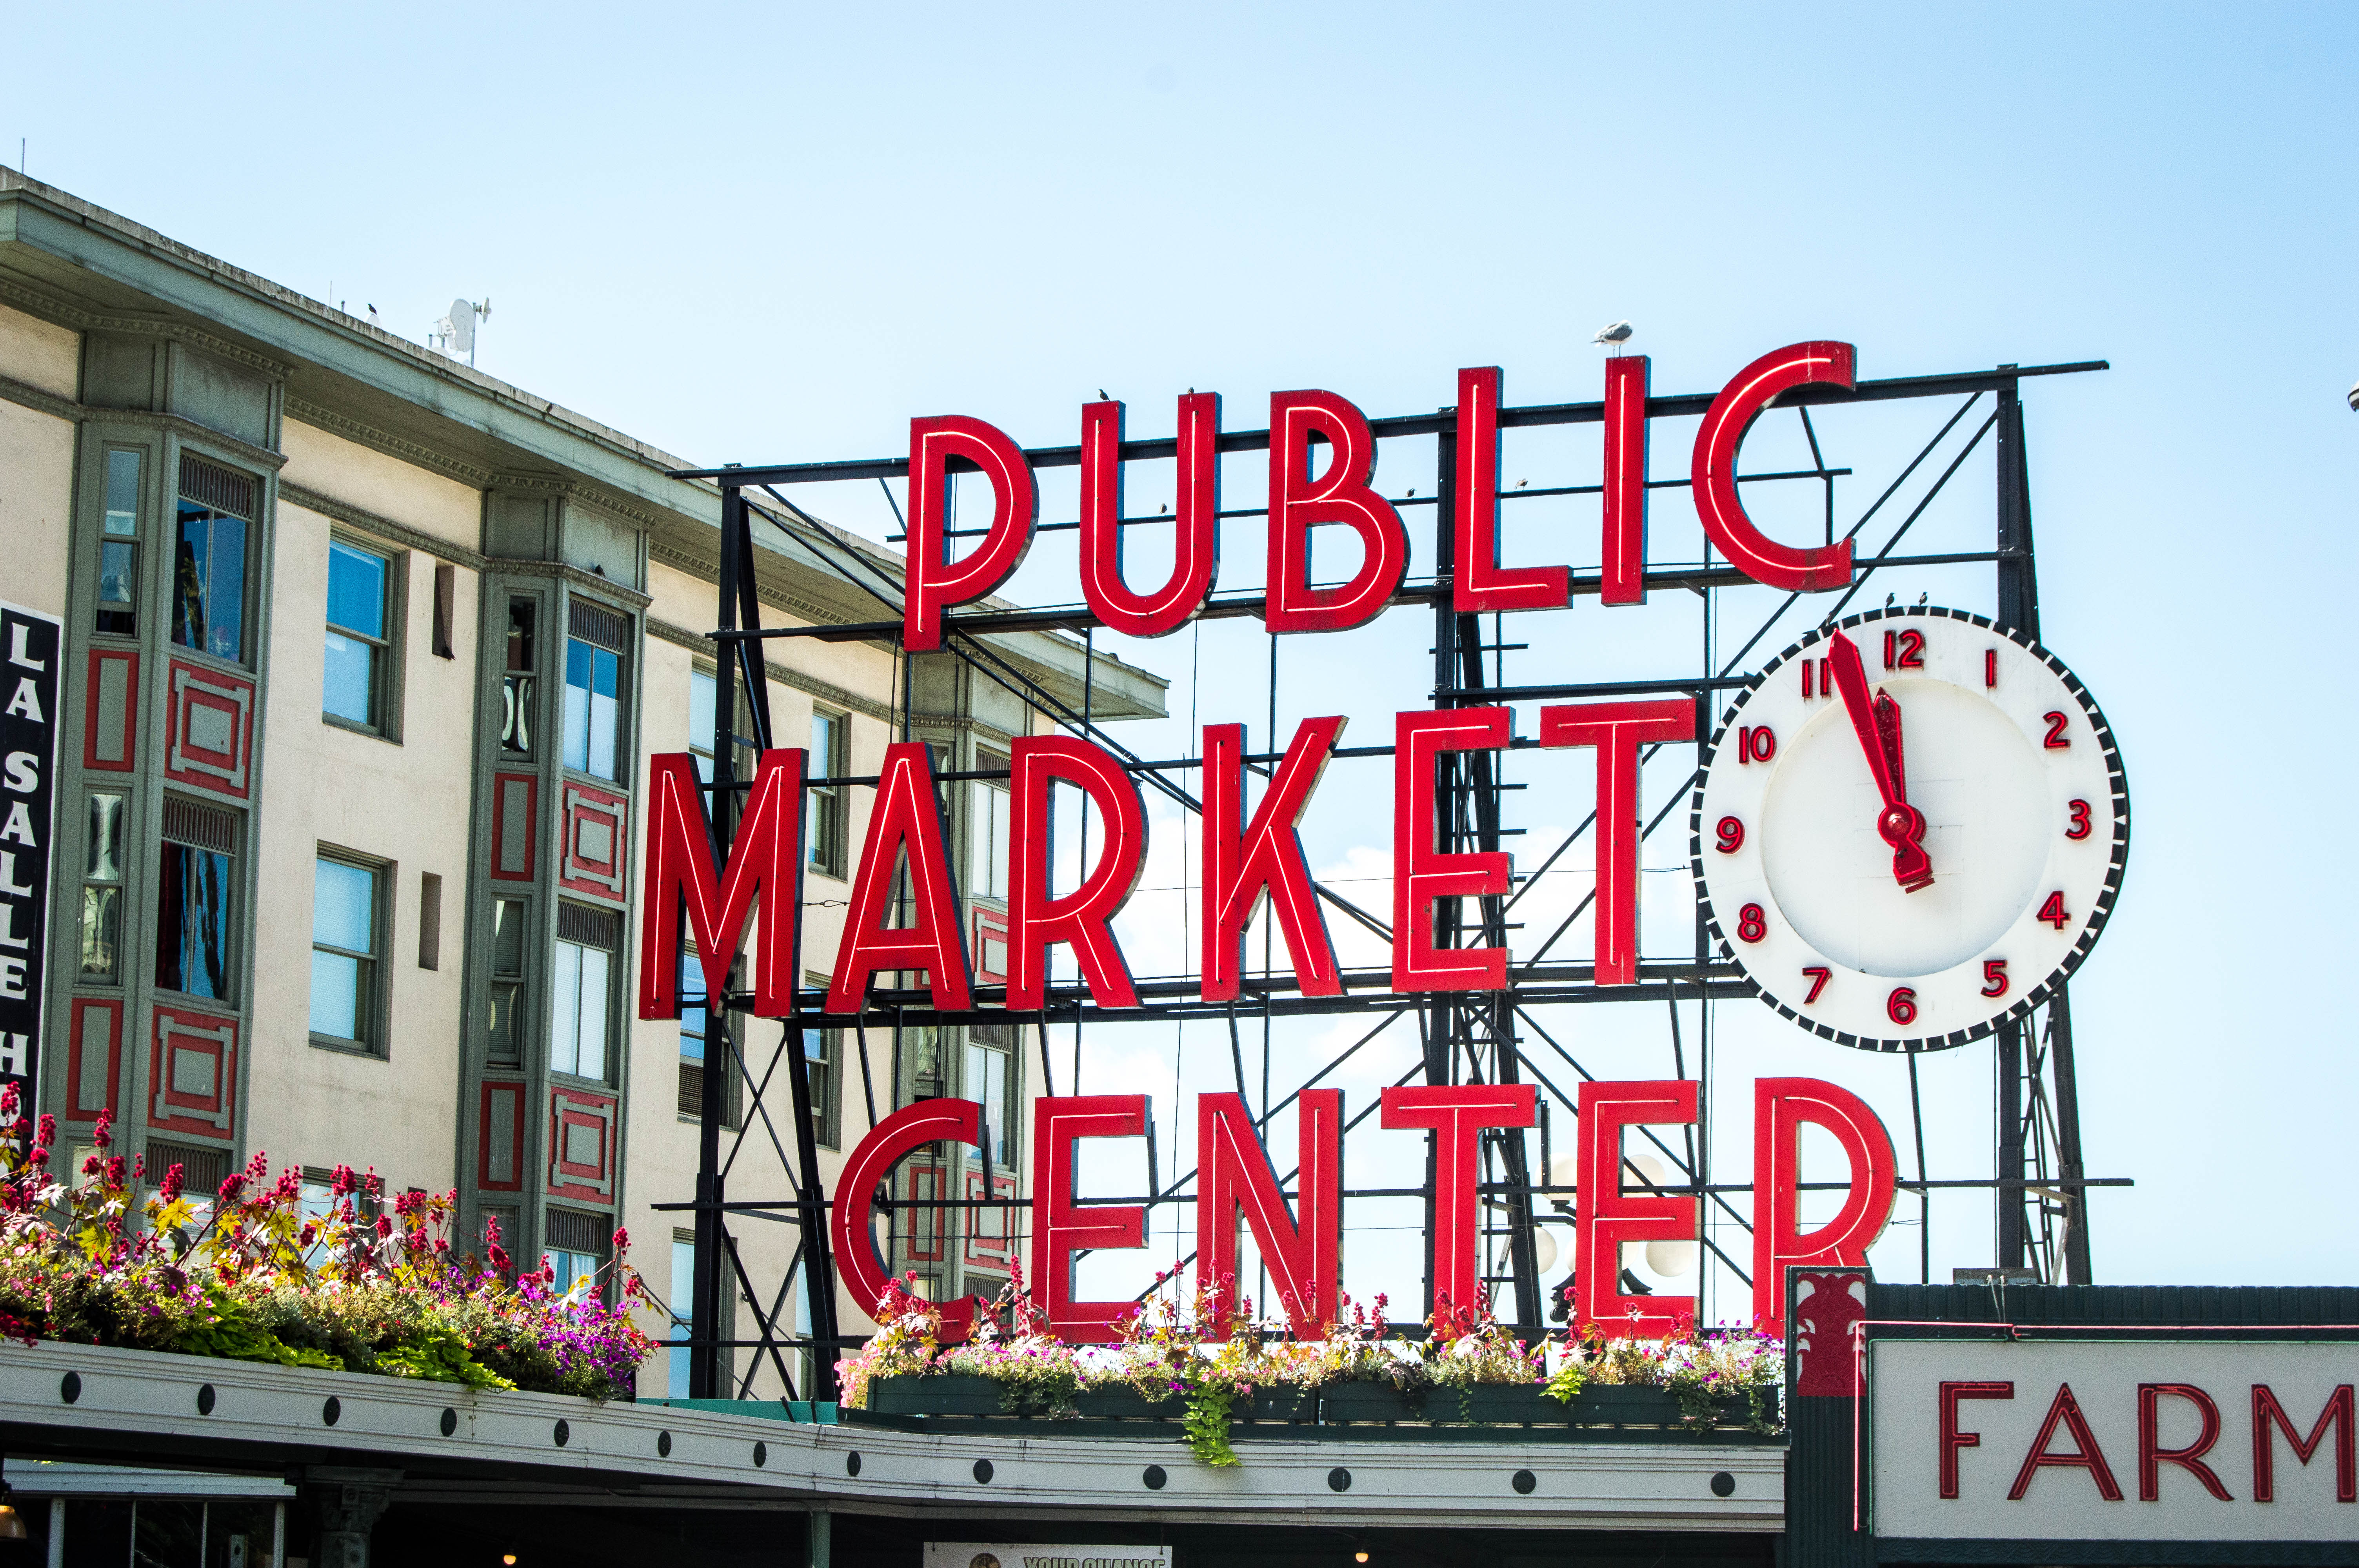 Seattle Pikes Place Market